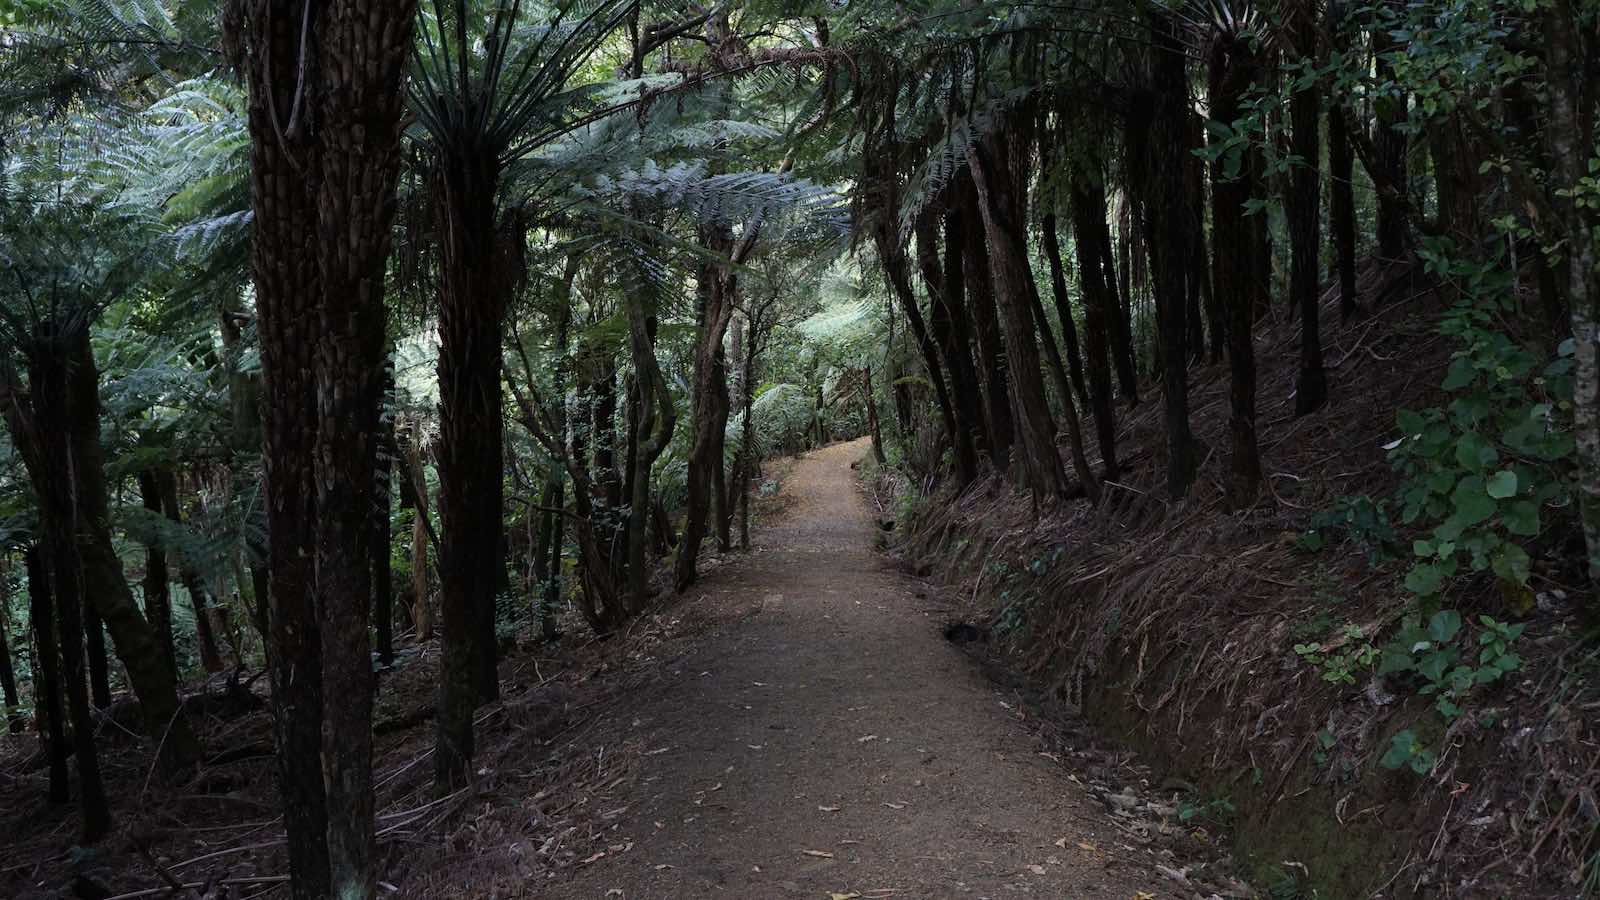 The trail to the beach